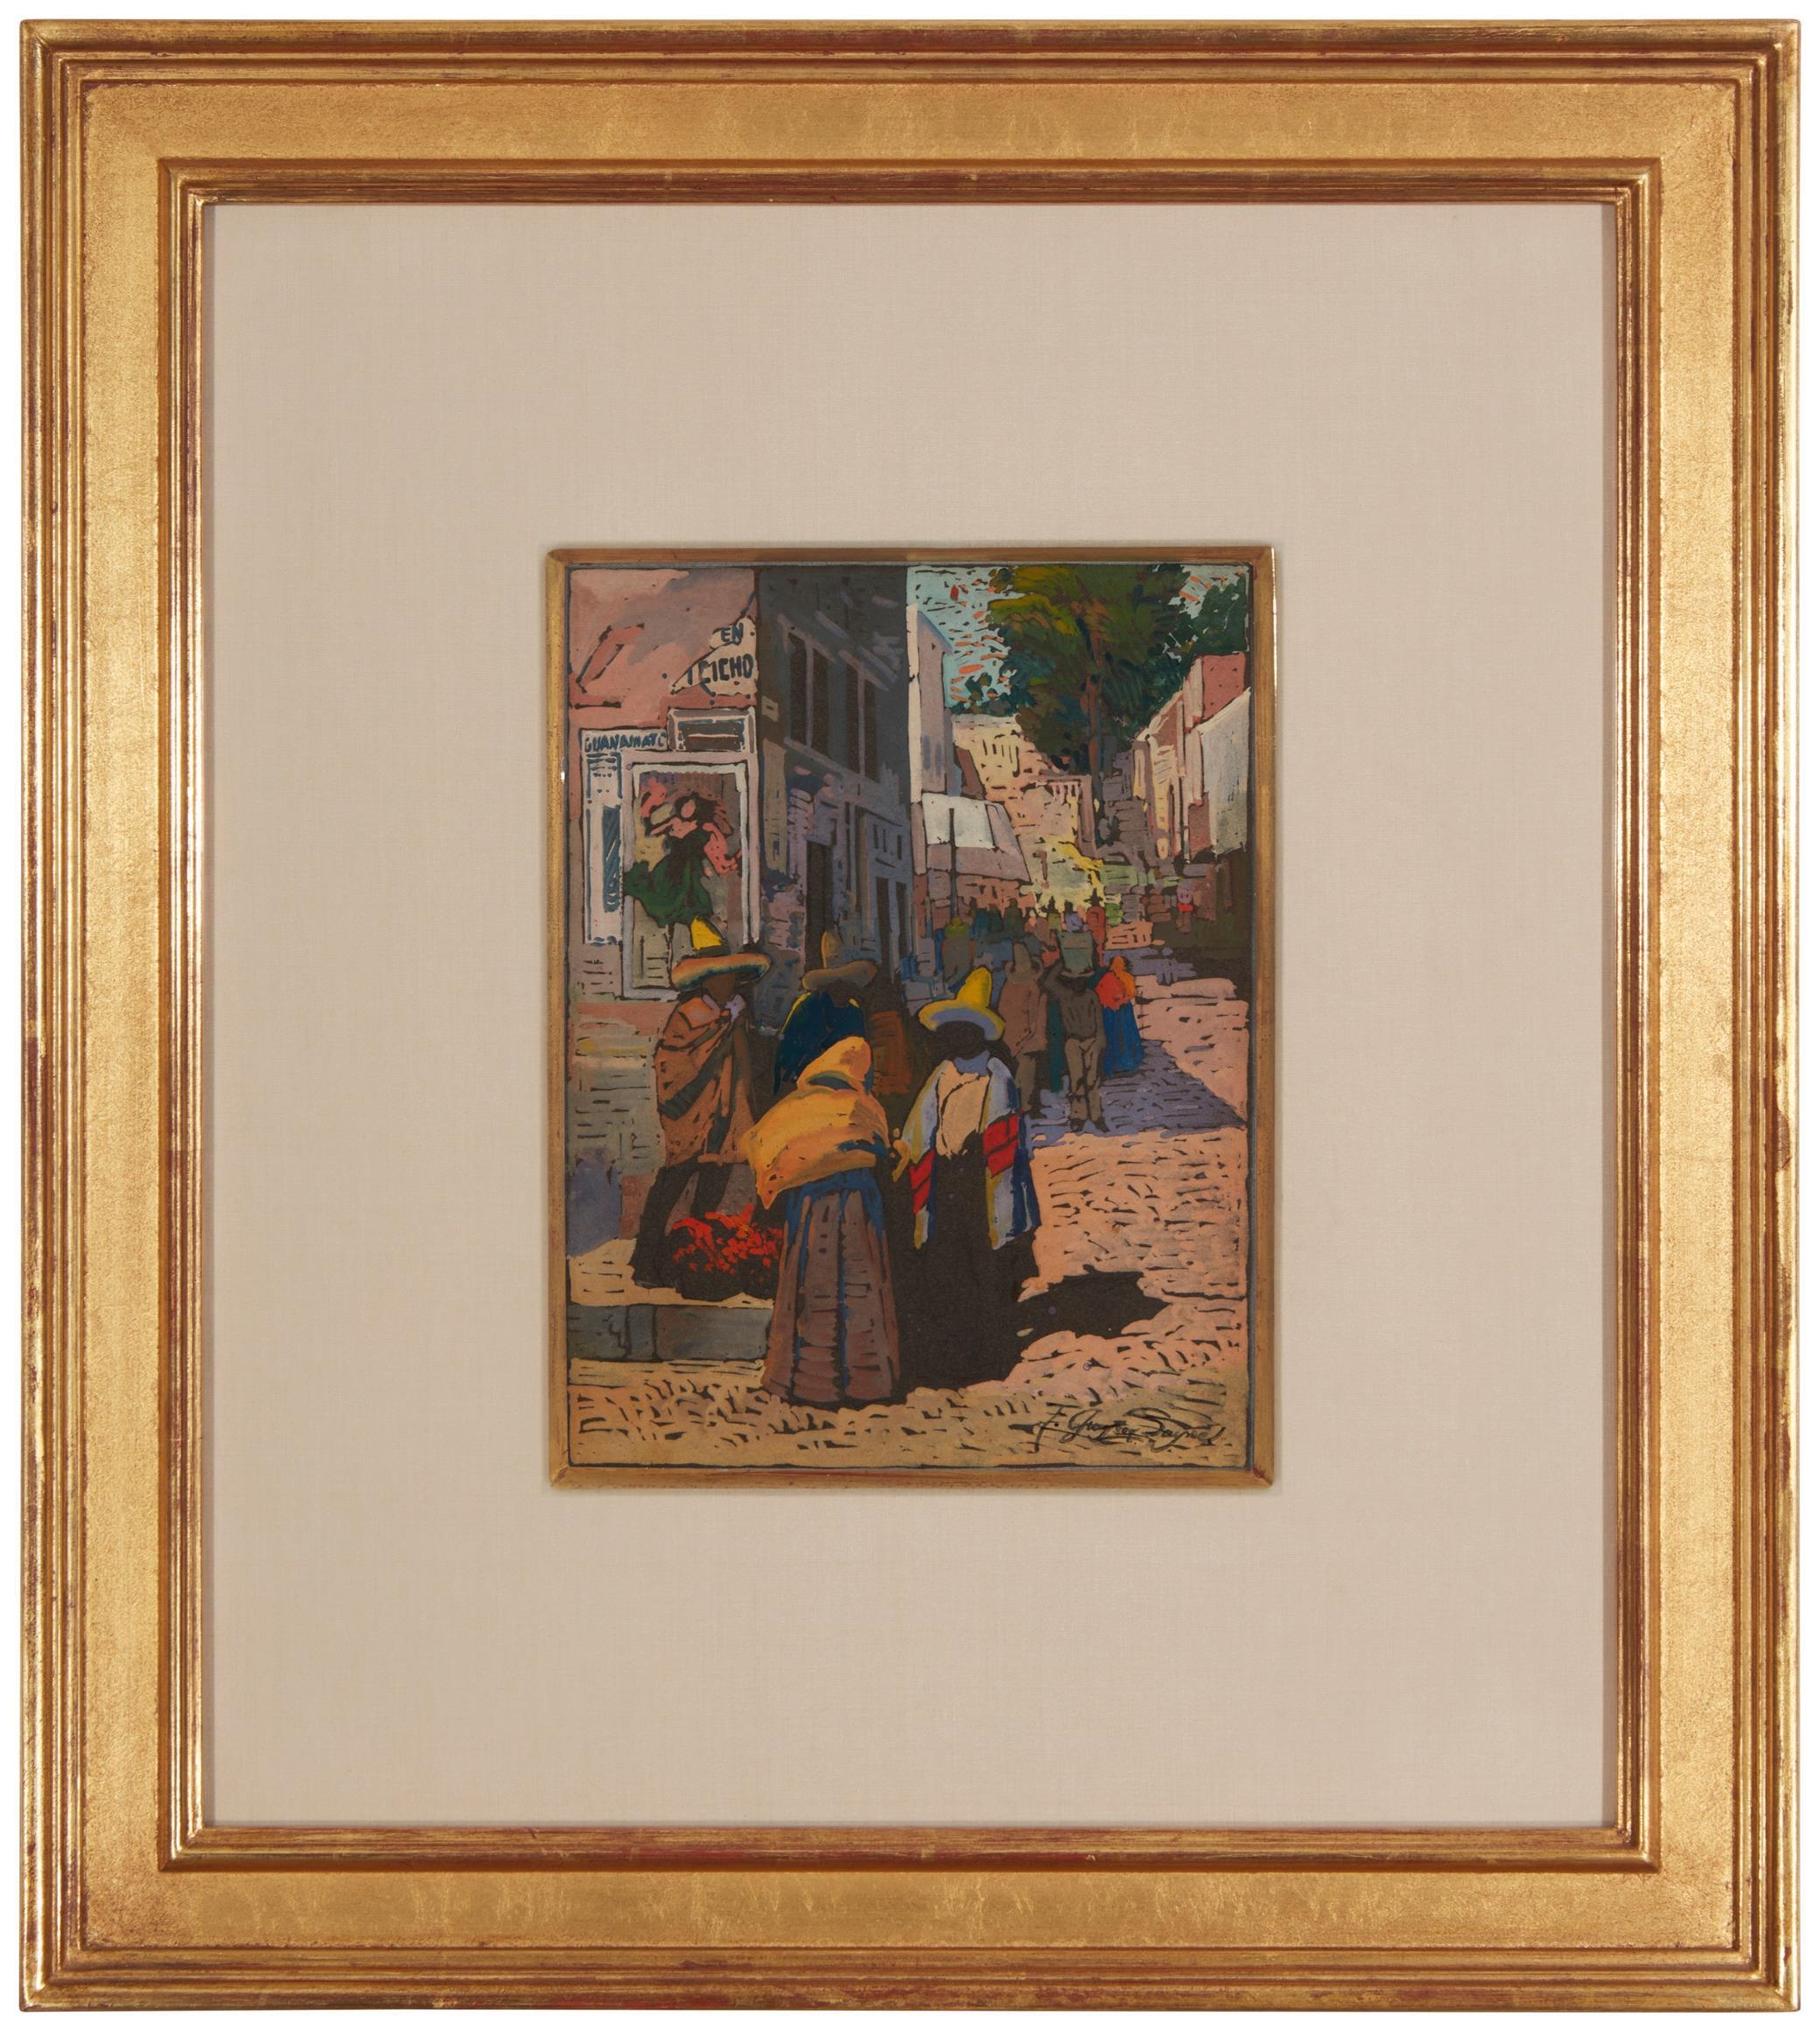 Artwork by Fred Grayson Sayre, Mexican Street Scene With Figures, Made of Gouche on board under glass